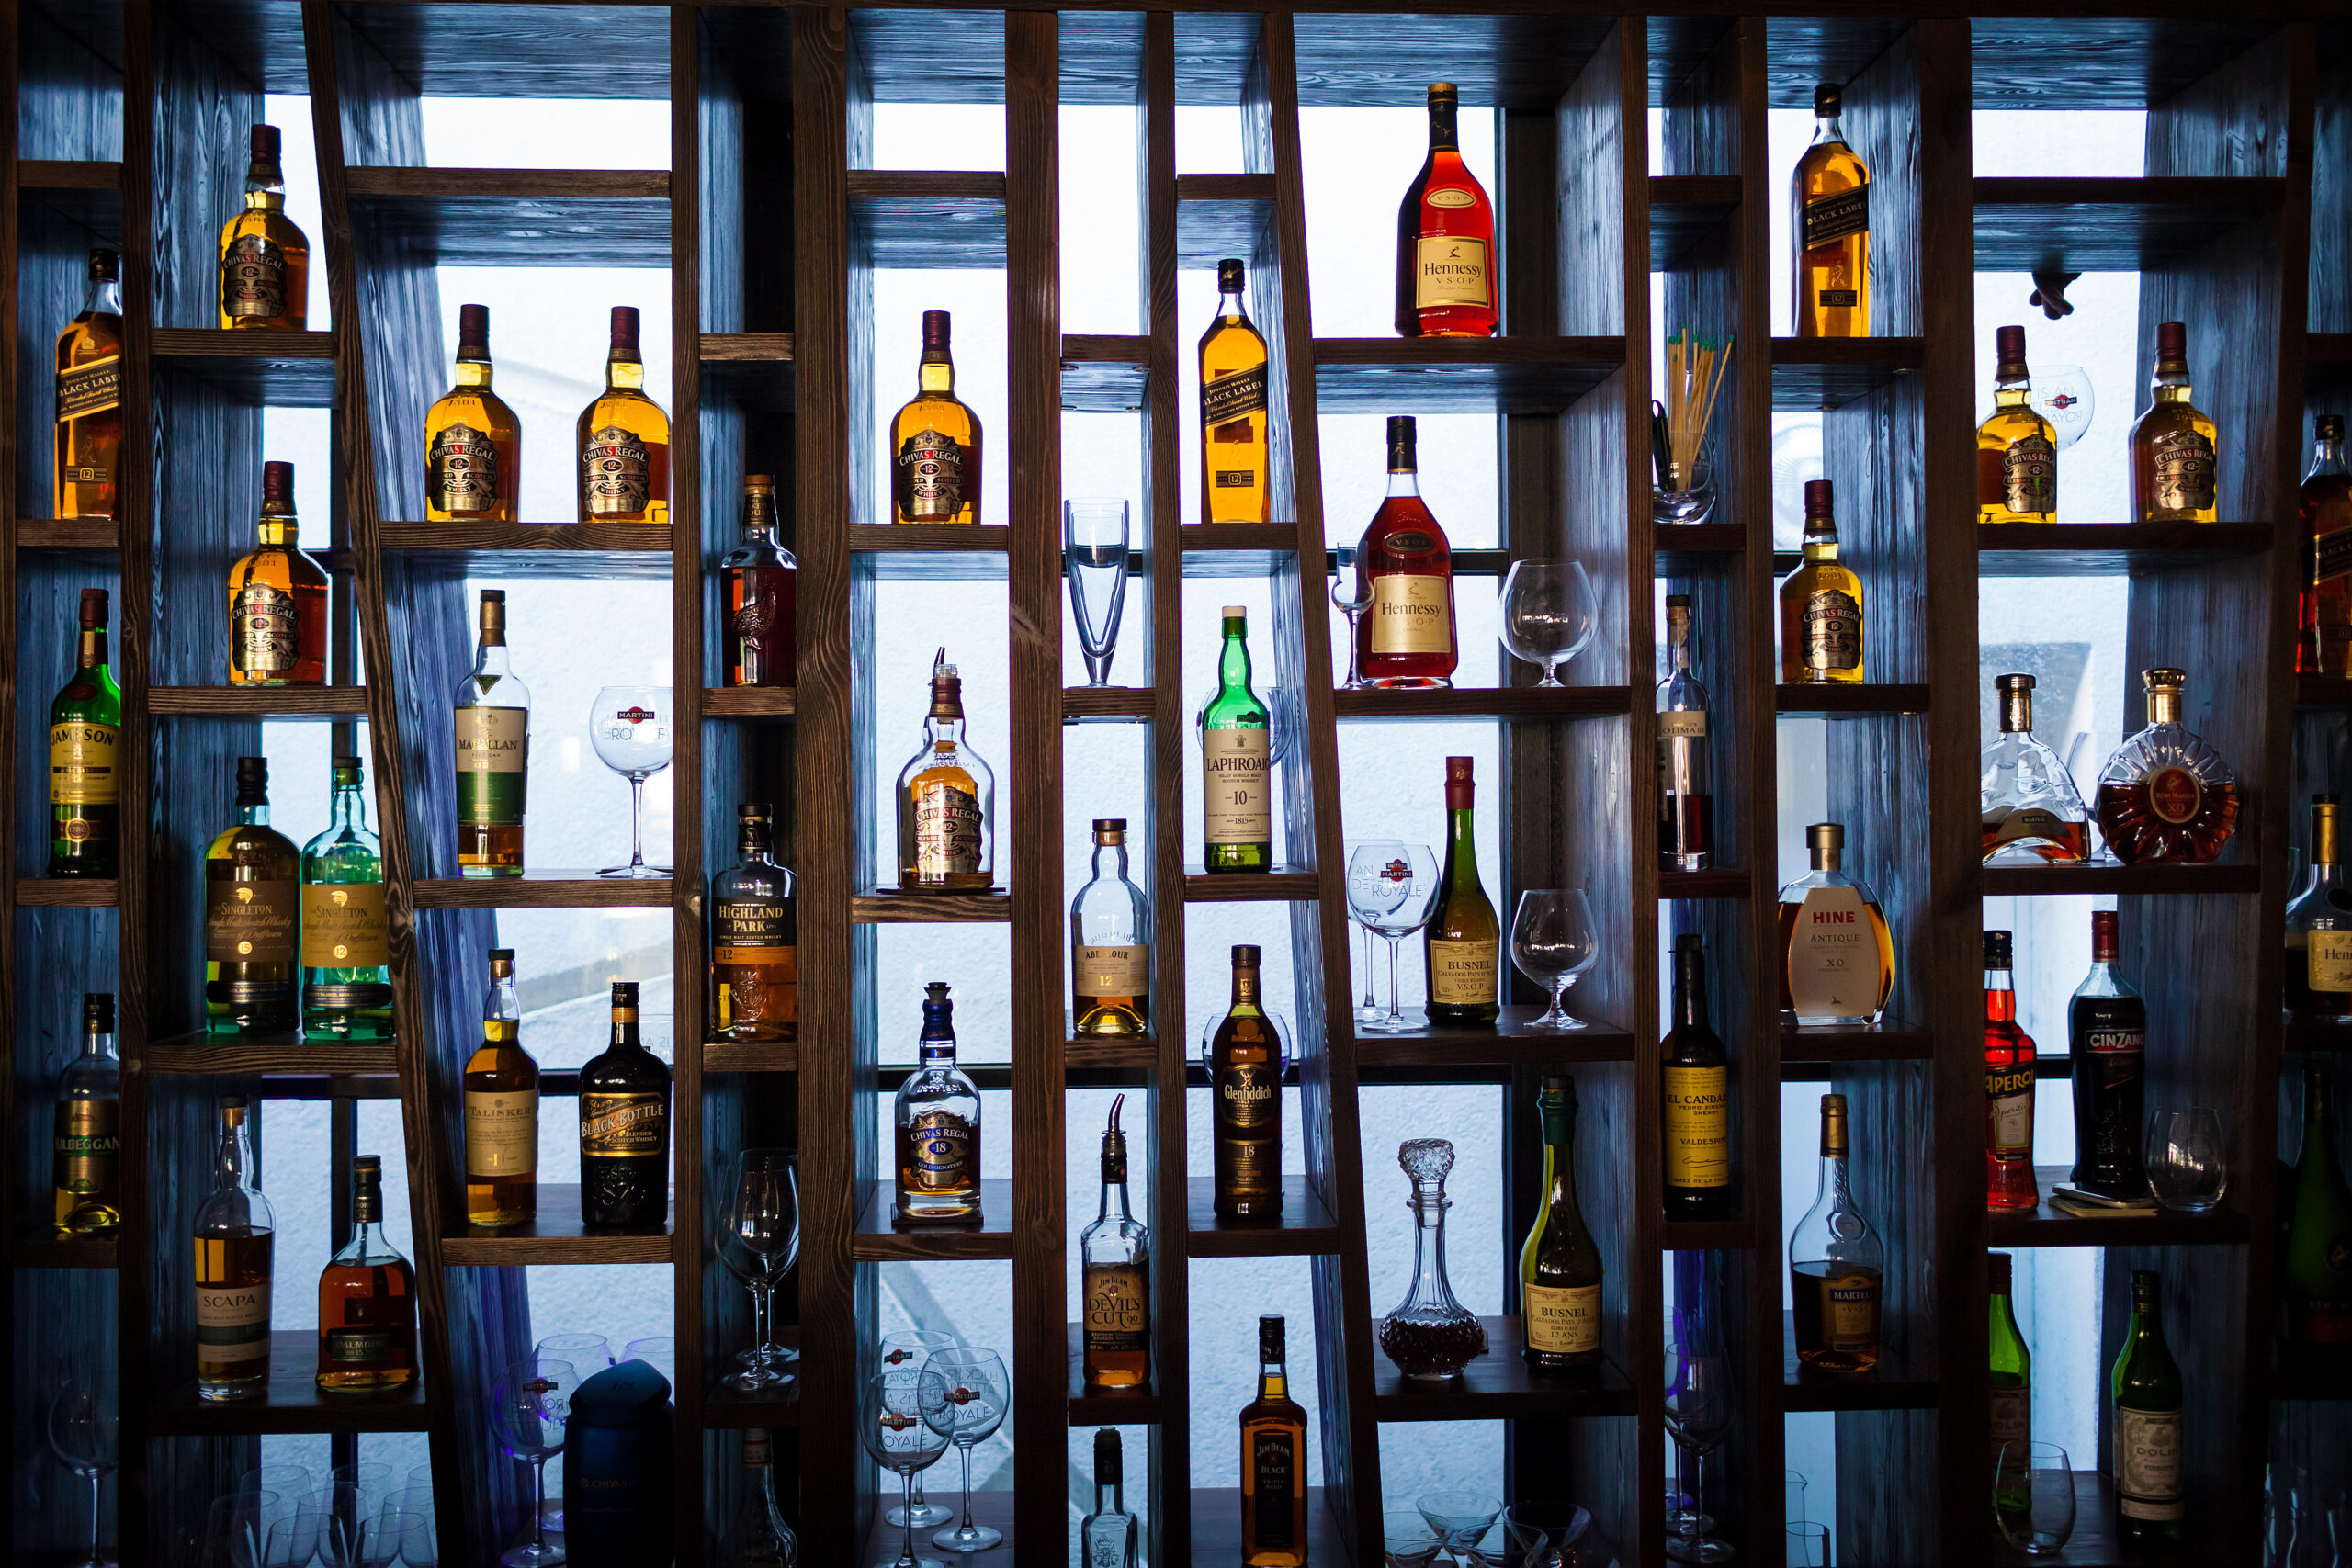 Photograph of shelves with bottles of alcoholic beverages and wine glasses on them.